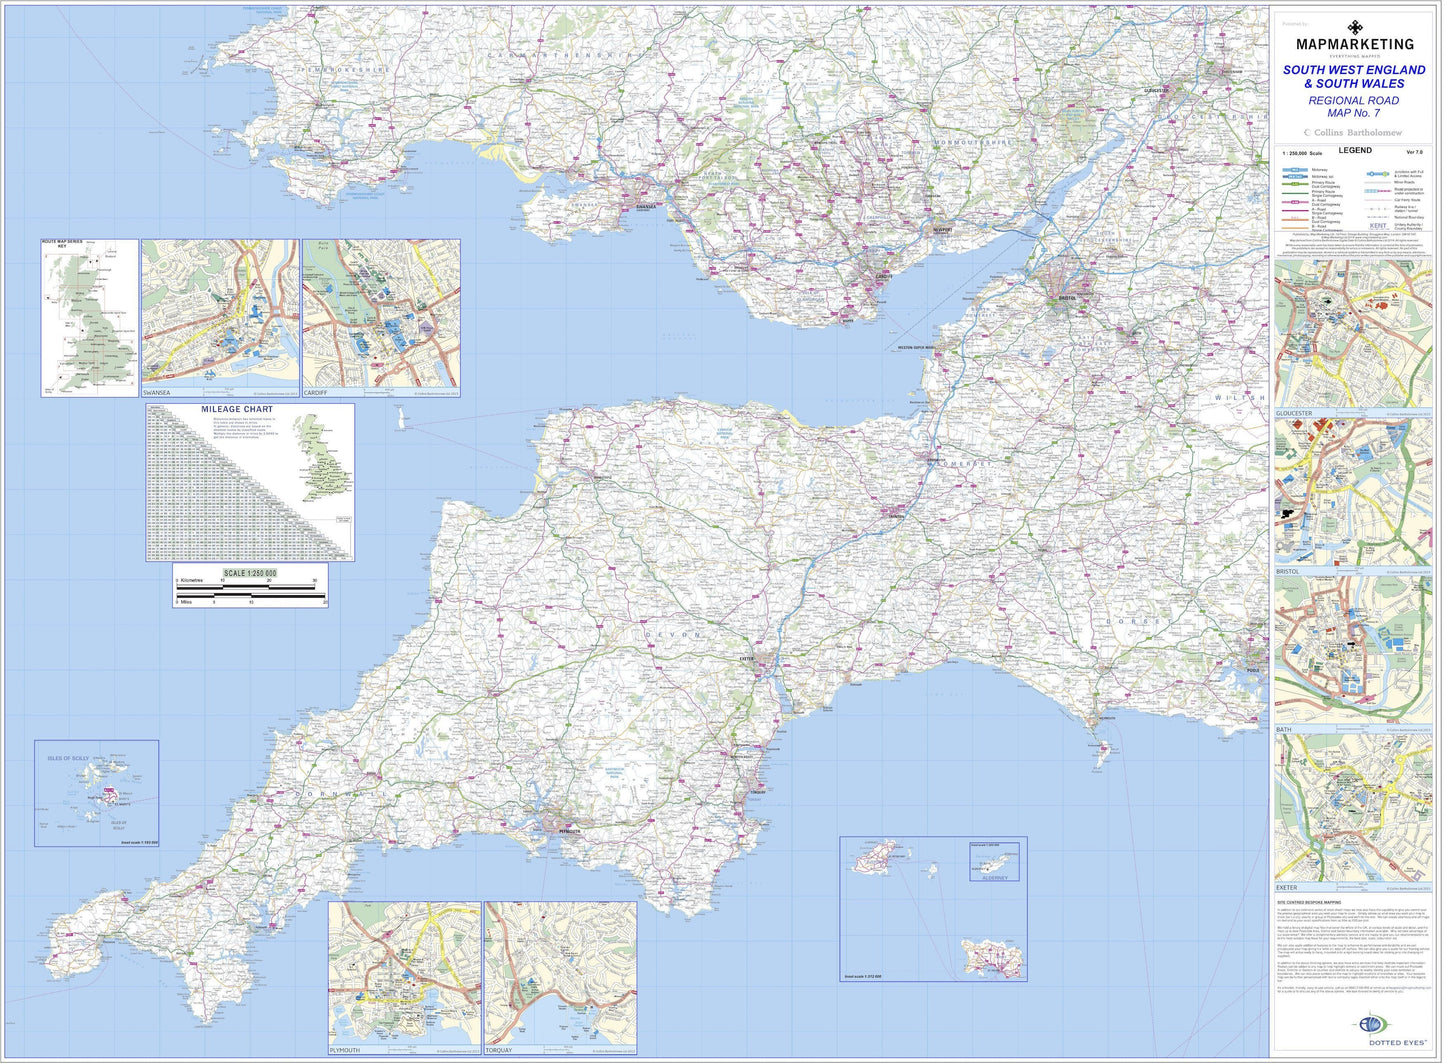 Wall Maps - South West England And South Wales Regional Road Map - Wall Map 7